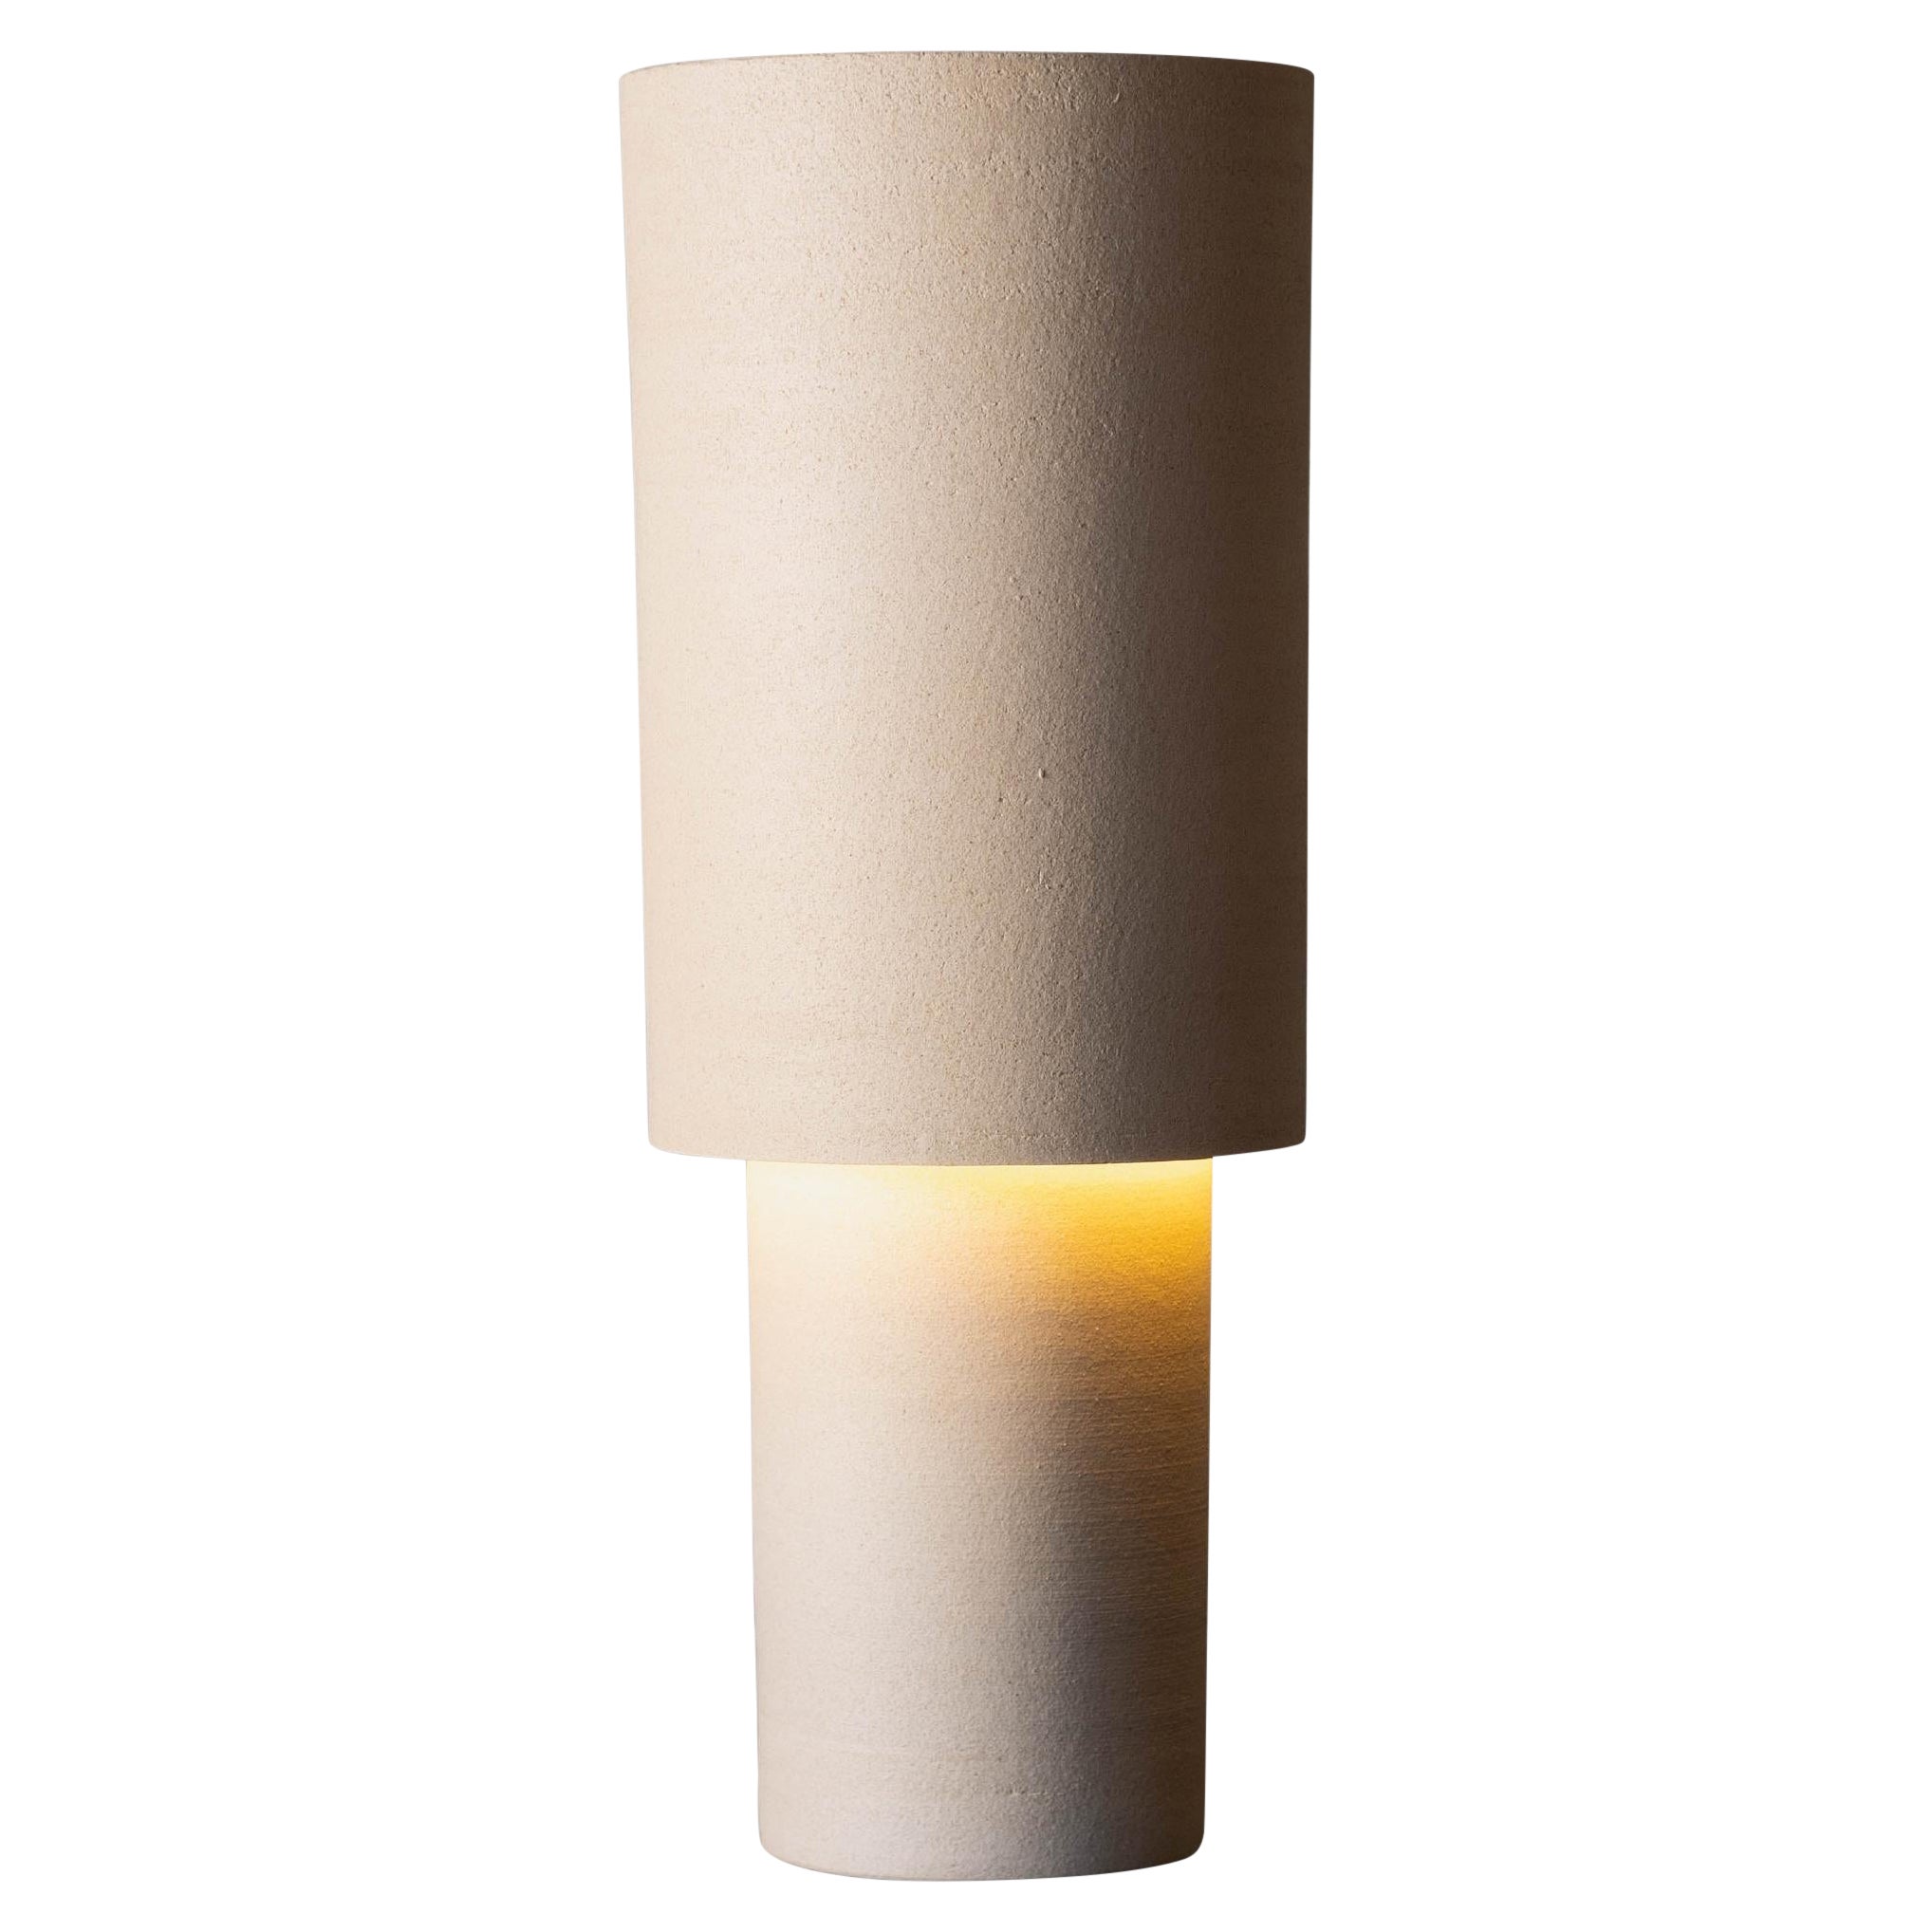 Large Ceramic Straight Walled Lamp